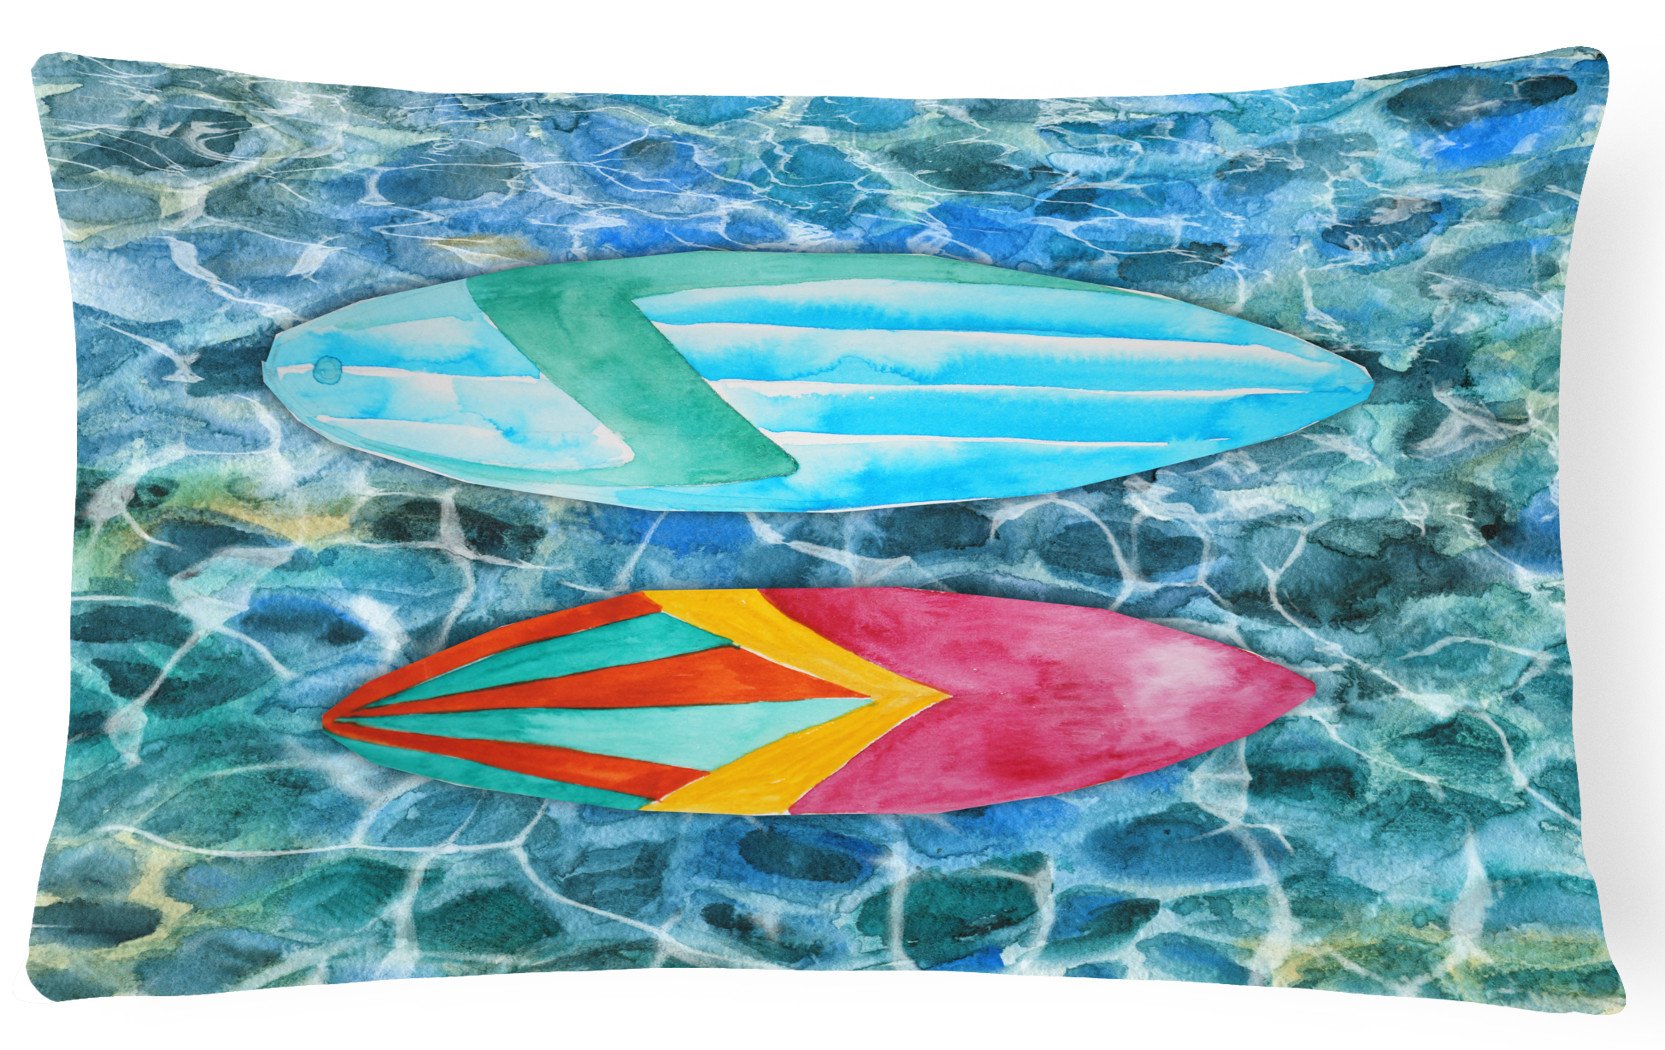 Surf Boards on the Water Canvas Fabric Decorative Pillow BB5366PW1216 by Caroline's Treasures